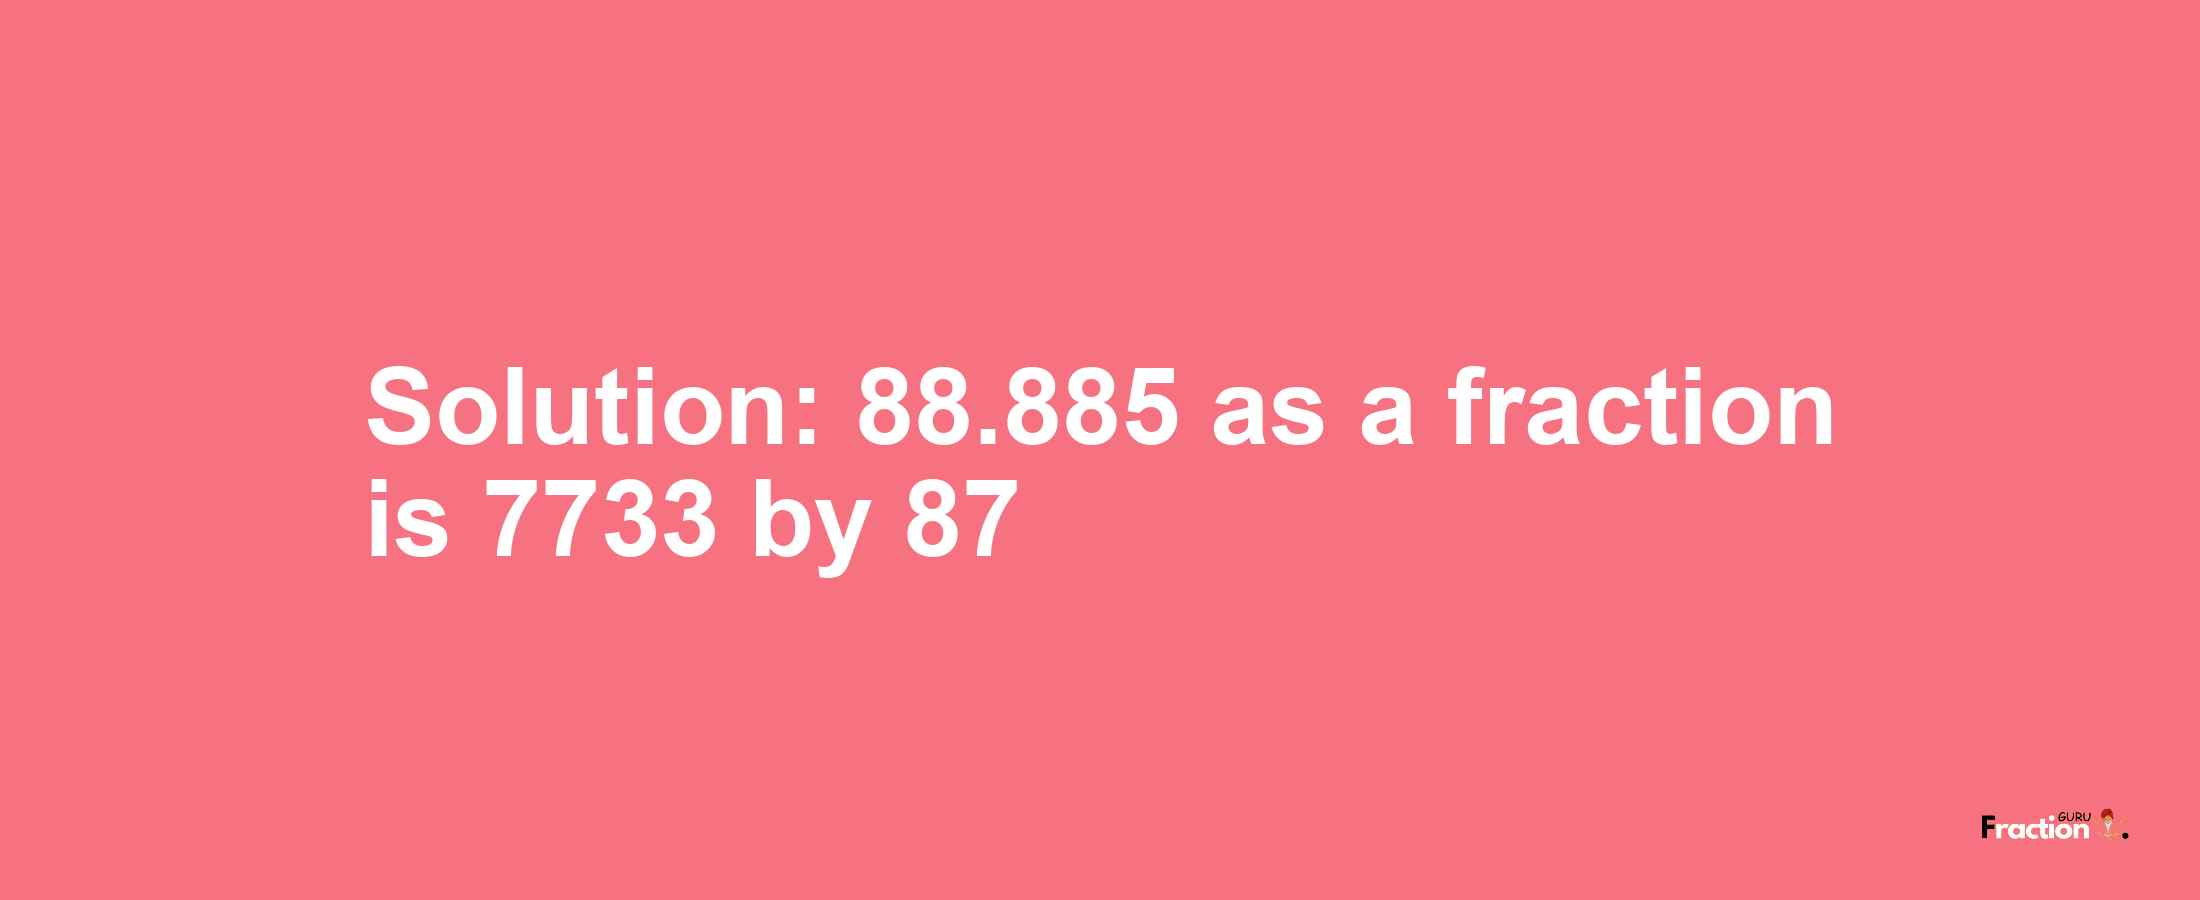 Solution:88.885 as a fraction is 7733/87